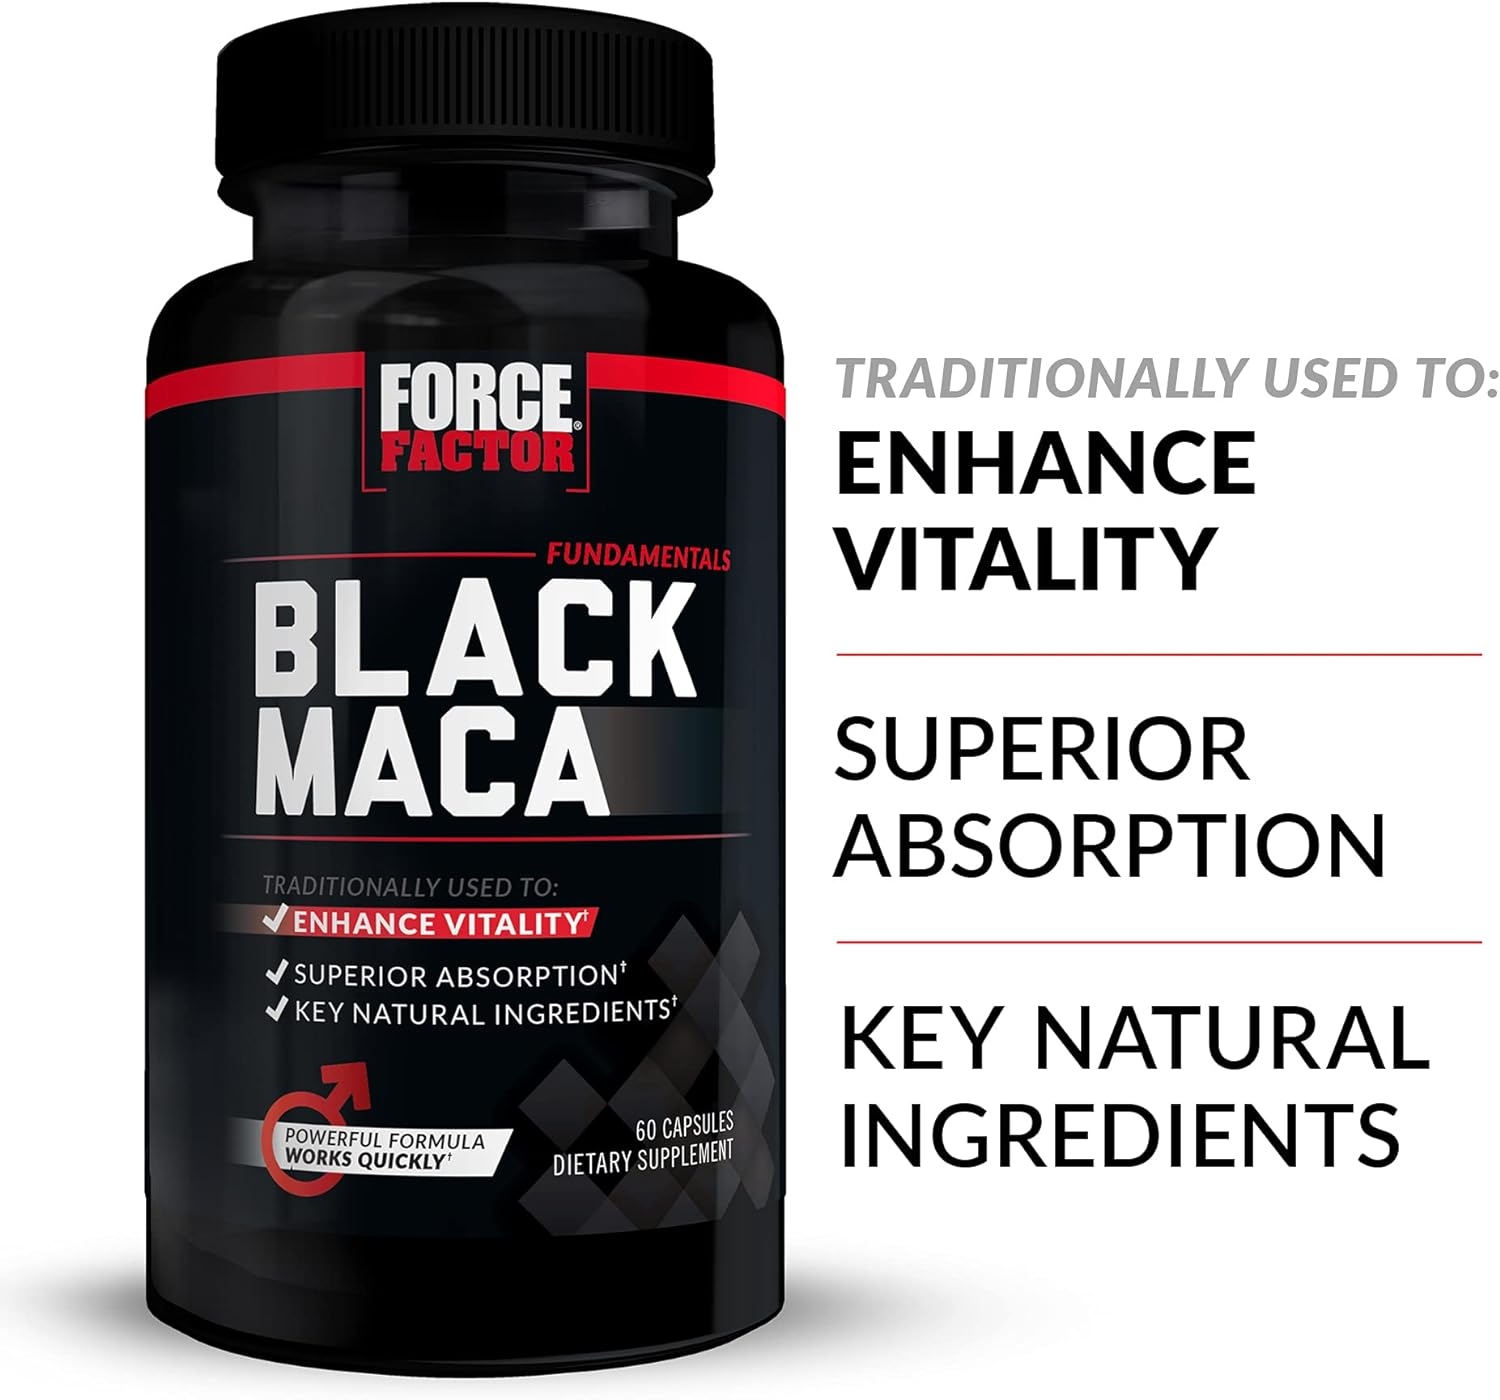 Black Maca Root Vitality Supplement for Men with Superior Absorption and Power, Natural Maca Negra Extract, Fundamentals Series, 1000mg, Force Factor, 120 Capsules (2-Pack)